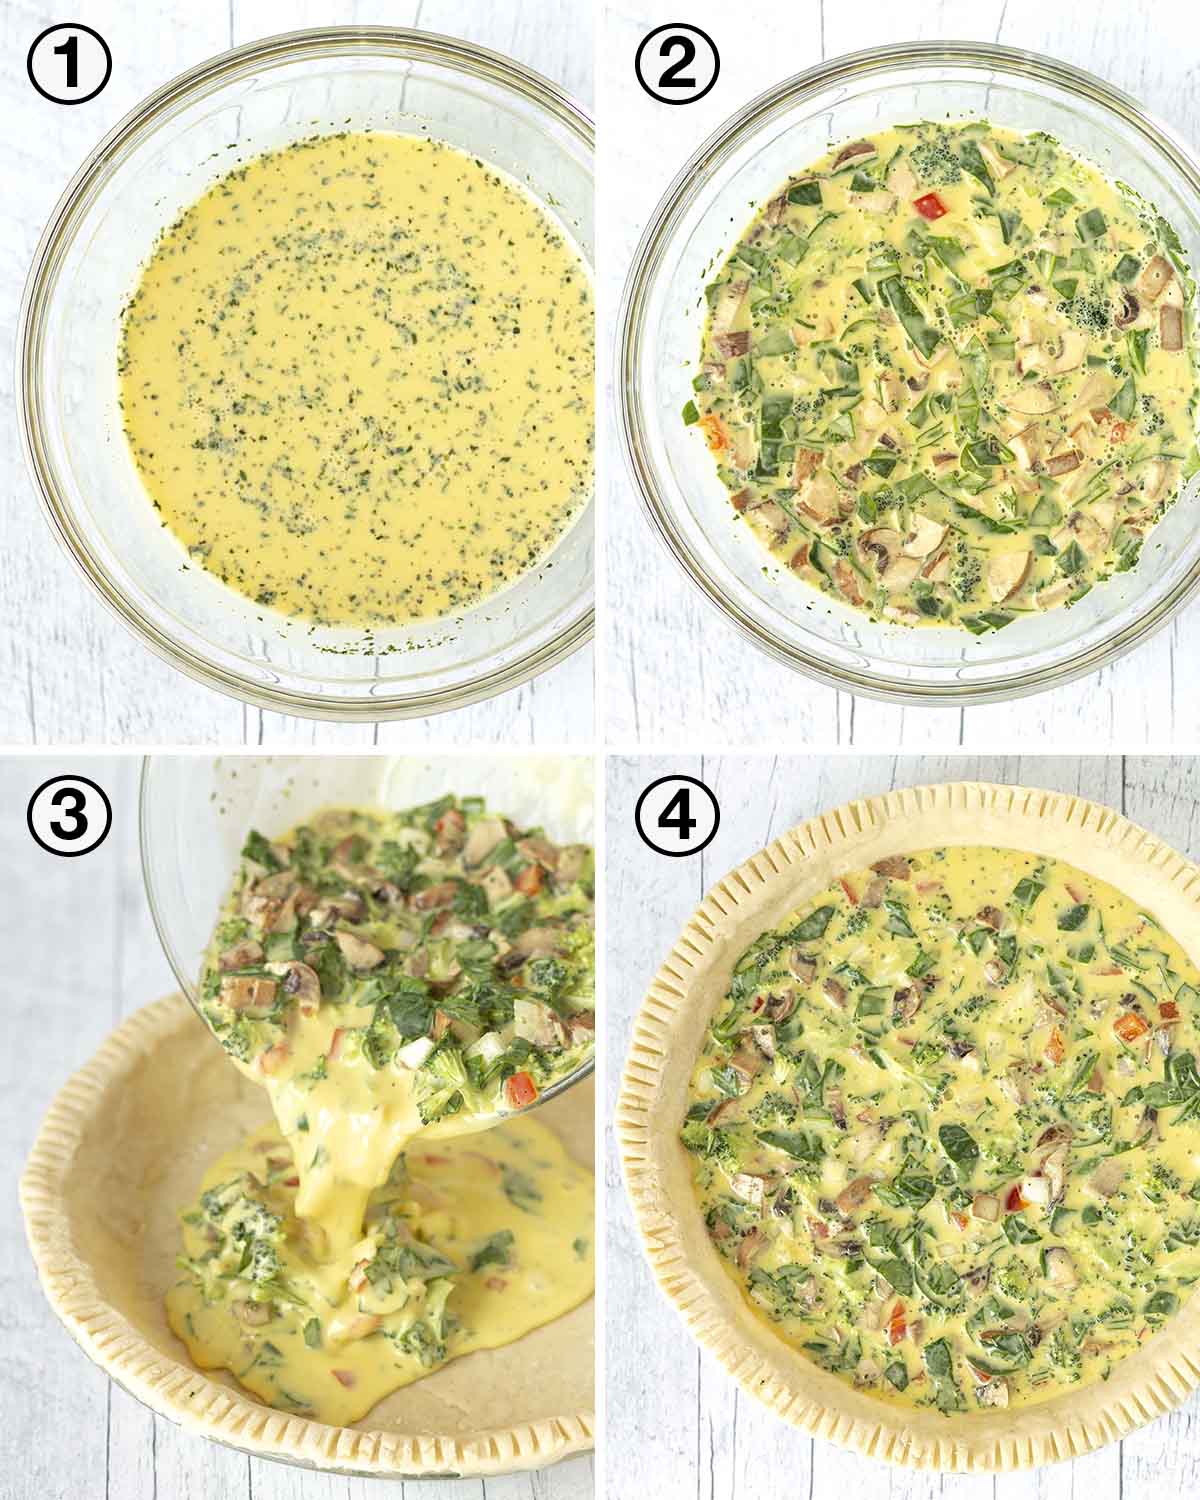 A collage of four images showing the first sequence of steps needed to make a quiche made with just egg.